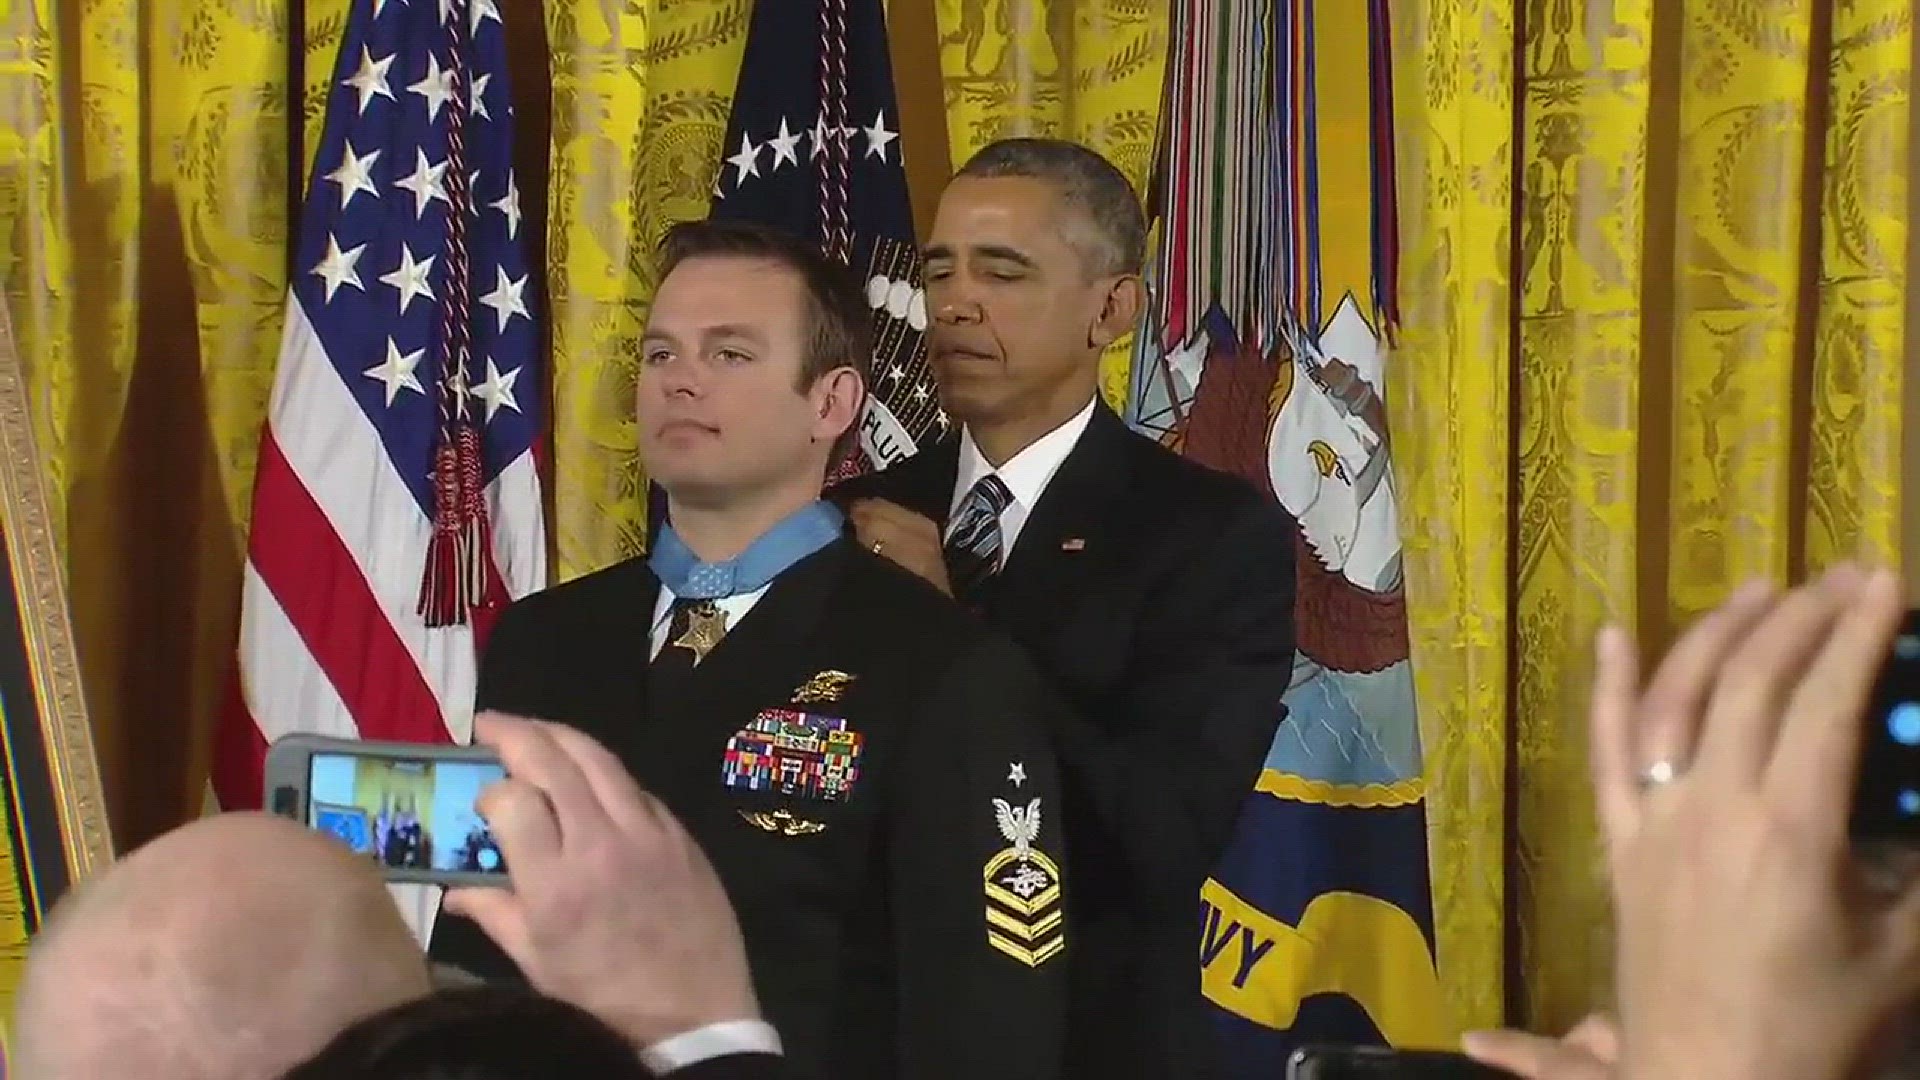 Senior Chief Petty Officer Edward Byers was awarded the Medal of Honor Monday.